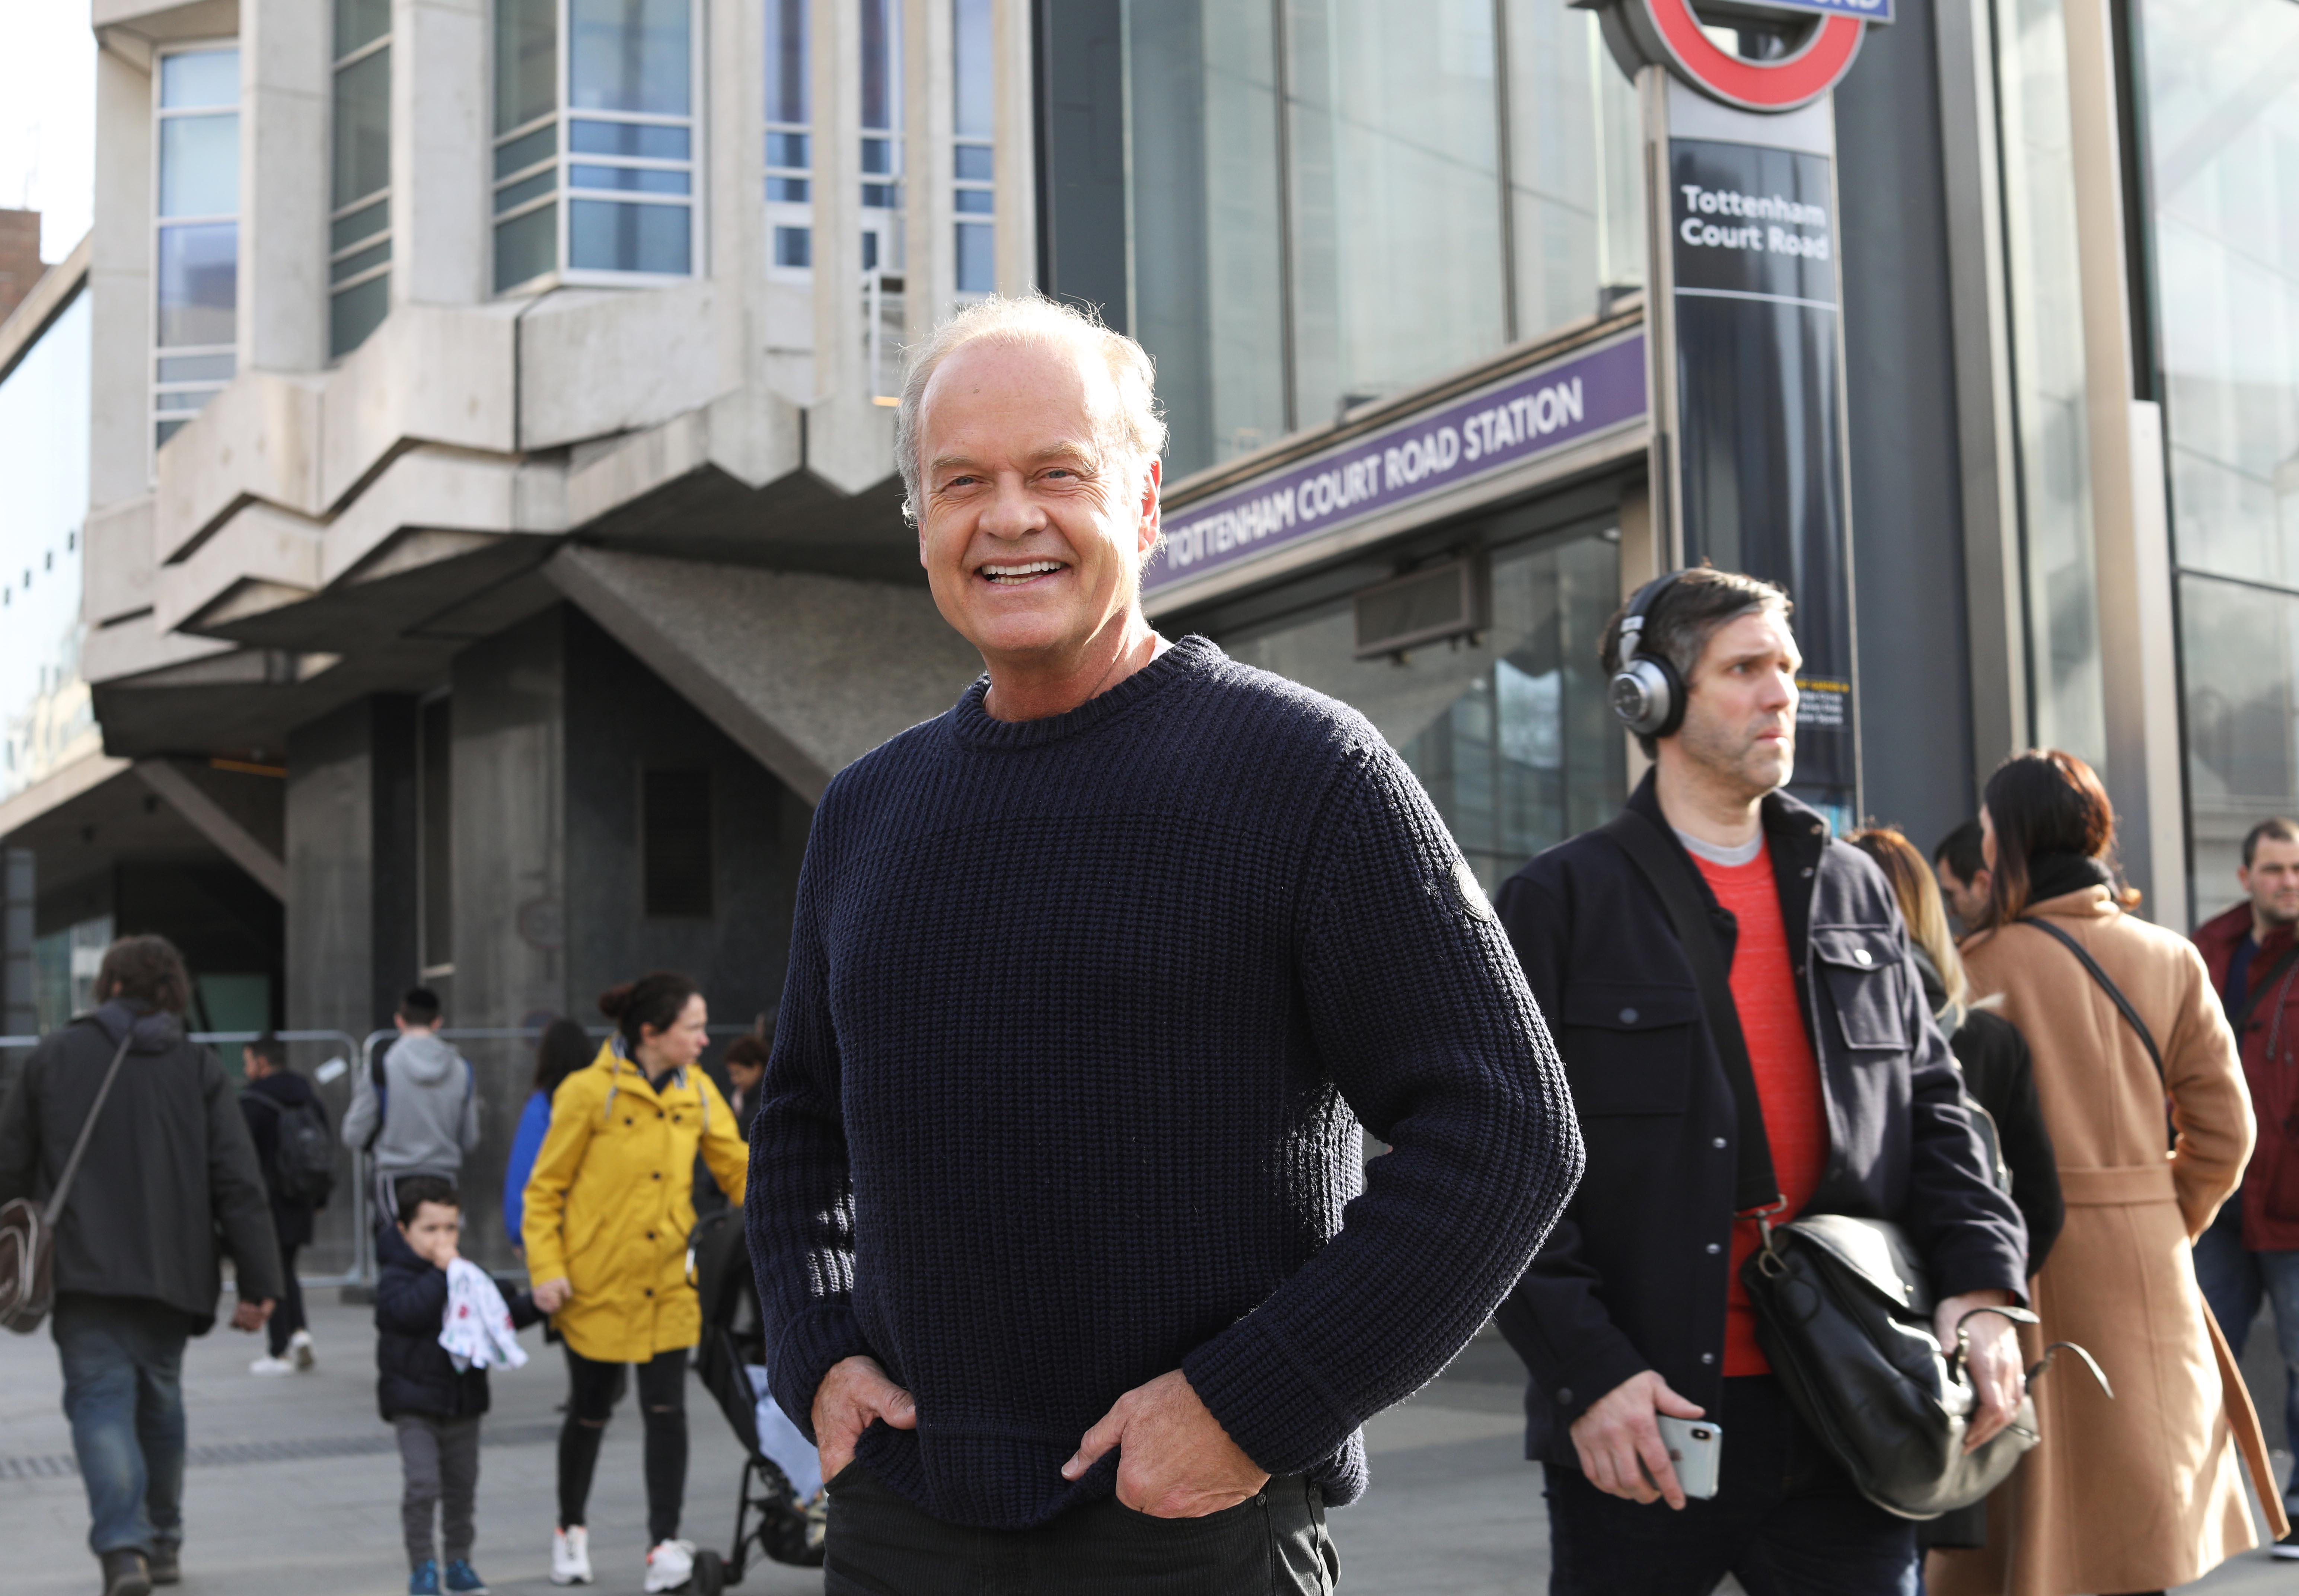 Kelsey Grammer delivered special tannoy announcements to commuters at Tottenham Court Road Station